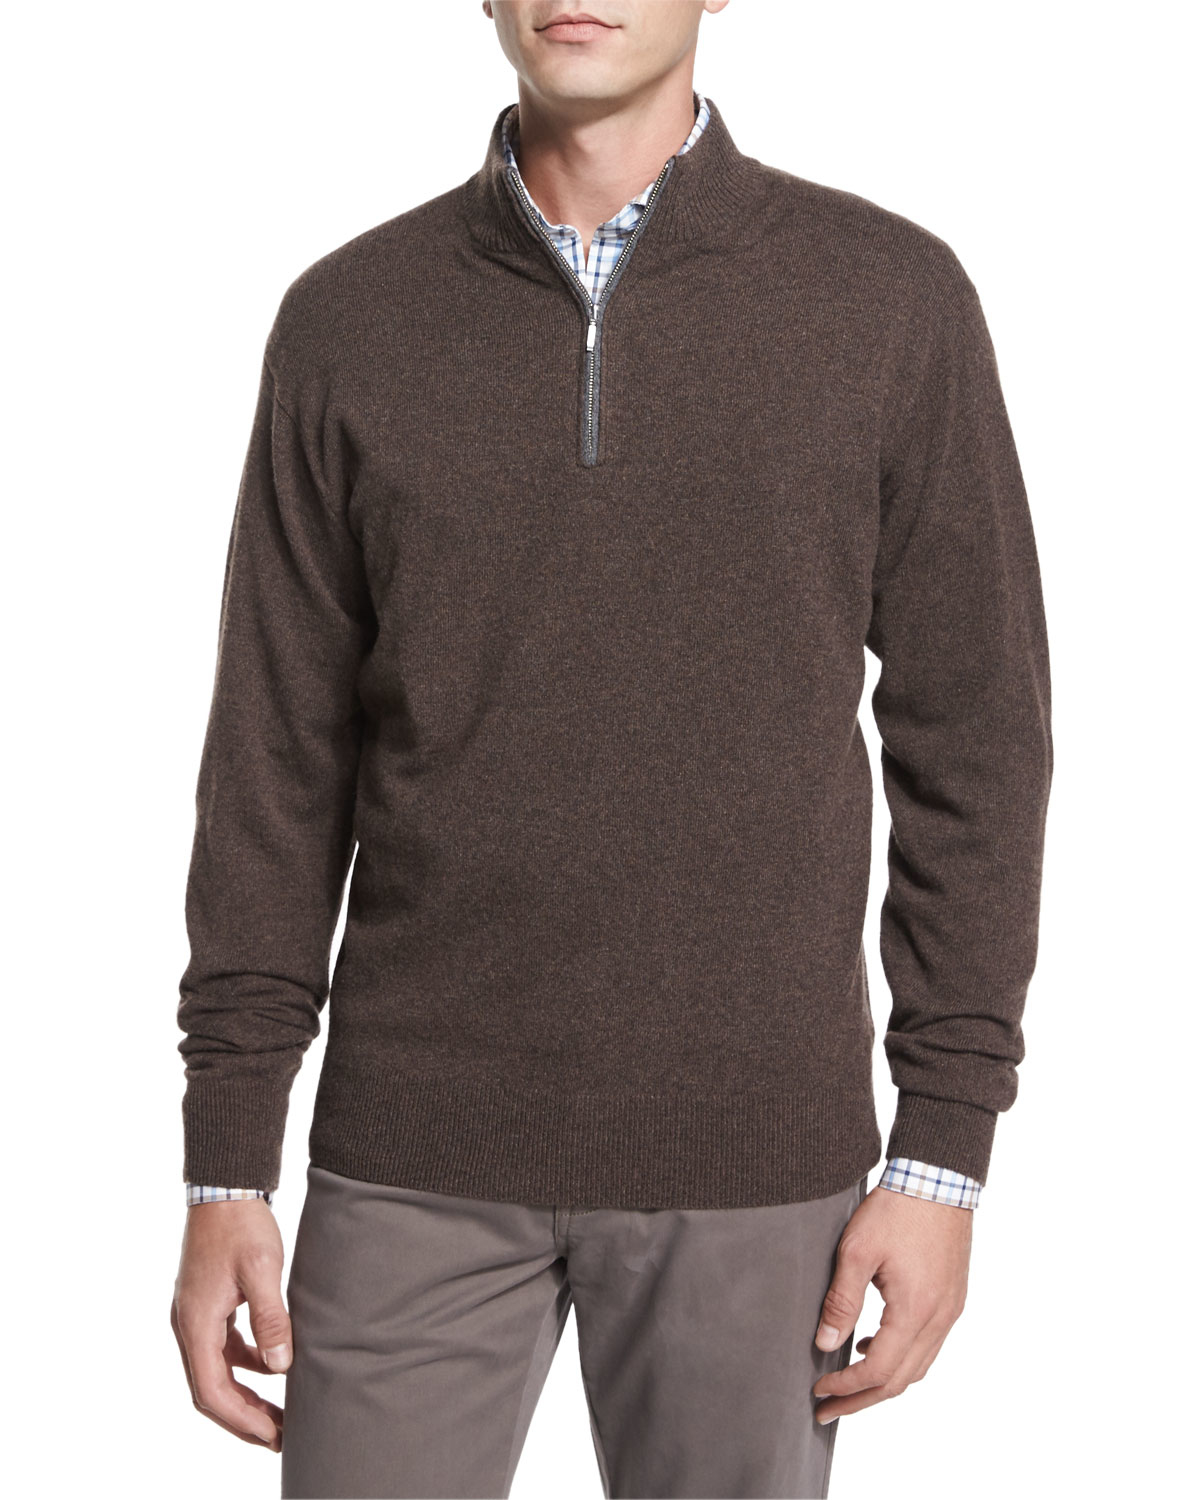 Lyst - Peter Millar Cashmere Quarter-zip Pullover Sweater in Red for Men